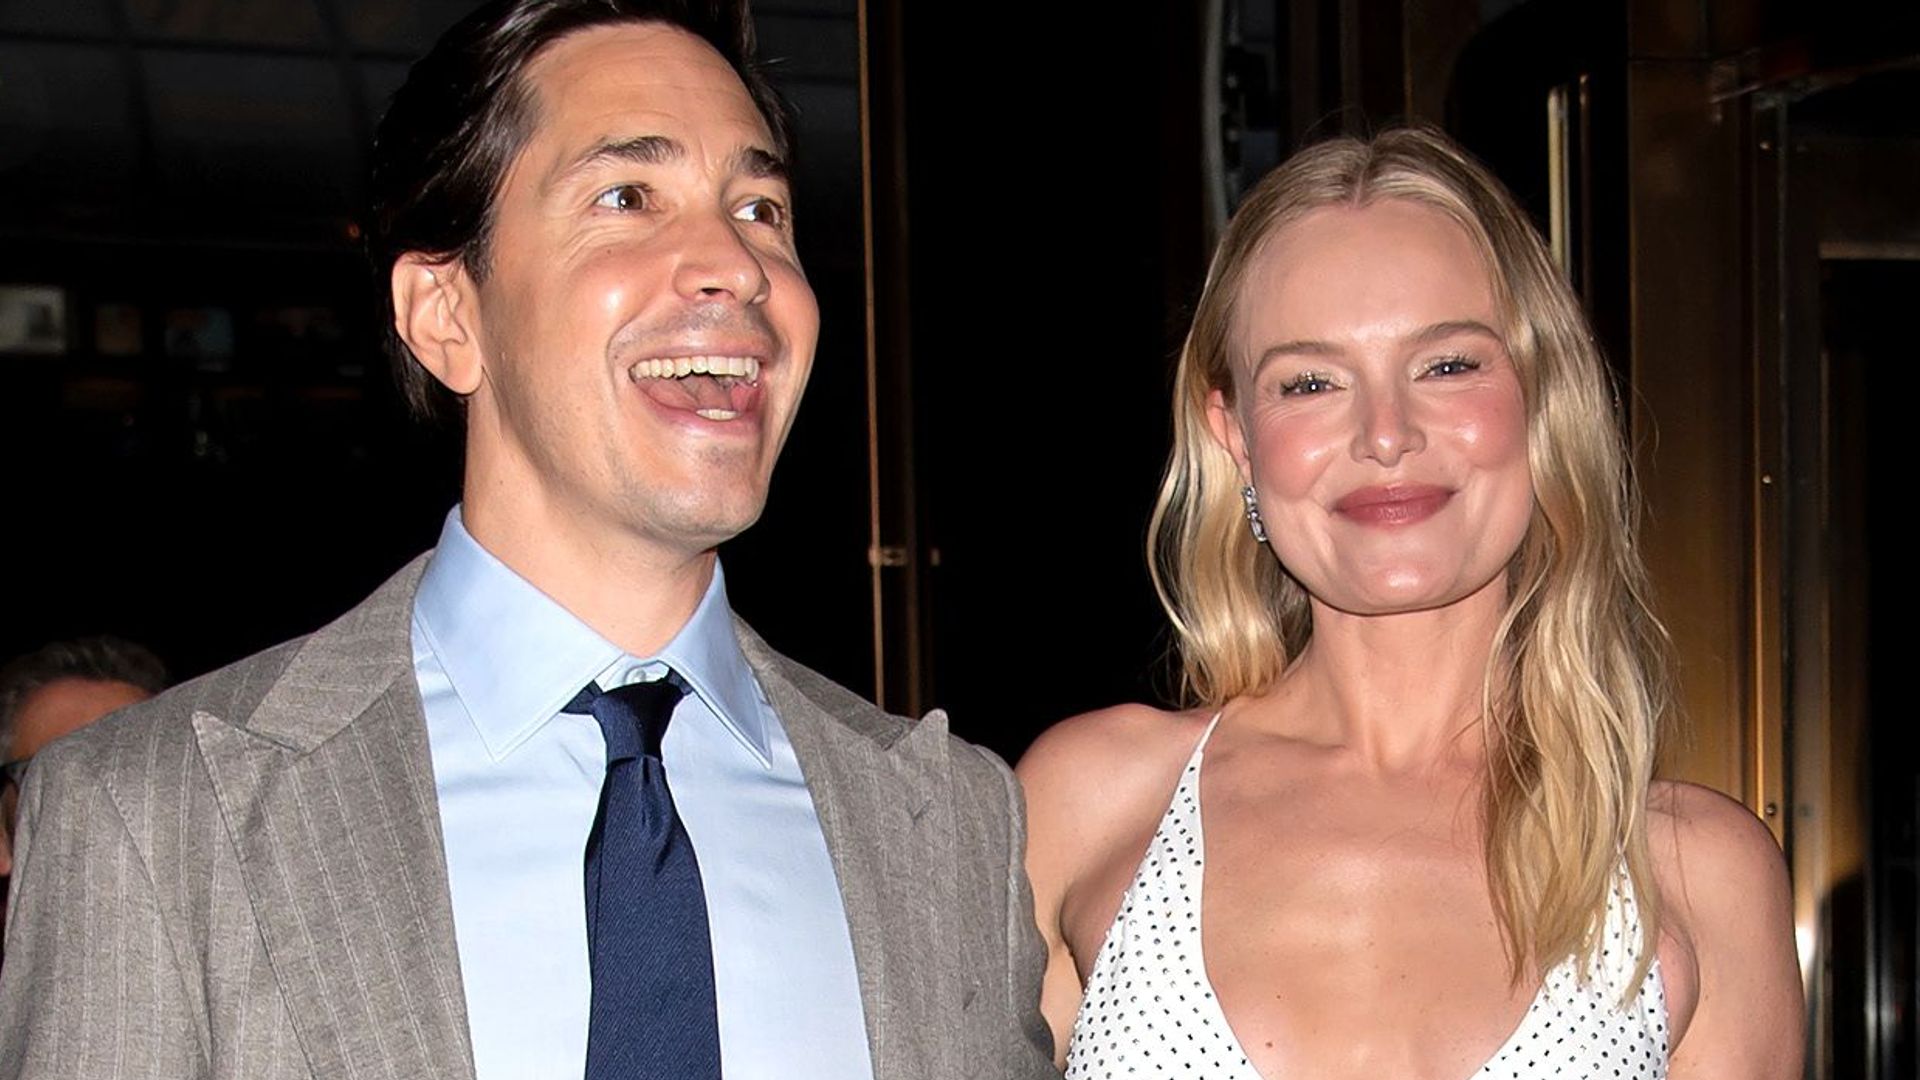 Kate Bosworth is dripping in diamantes in glitzy bridal gown with Justin Long